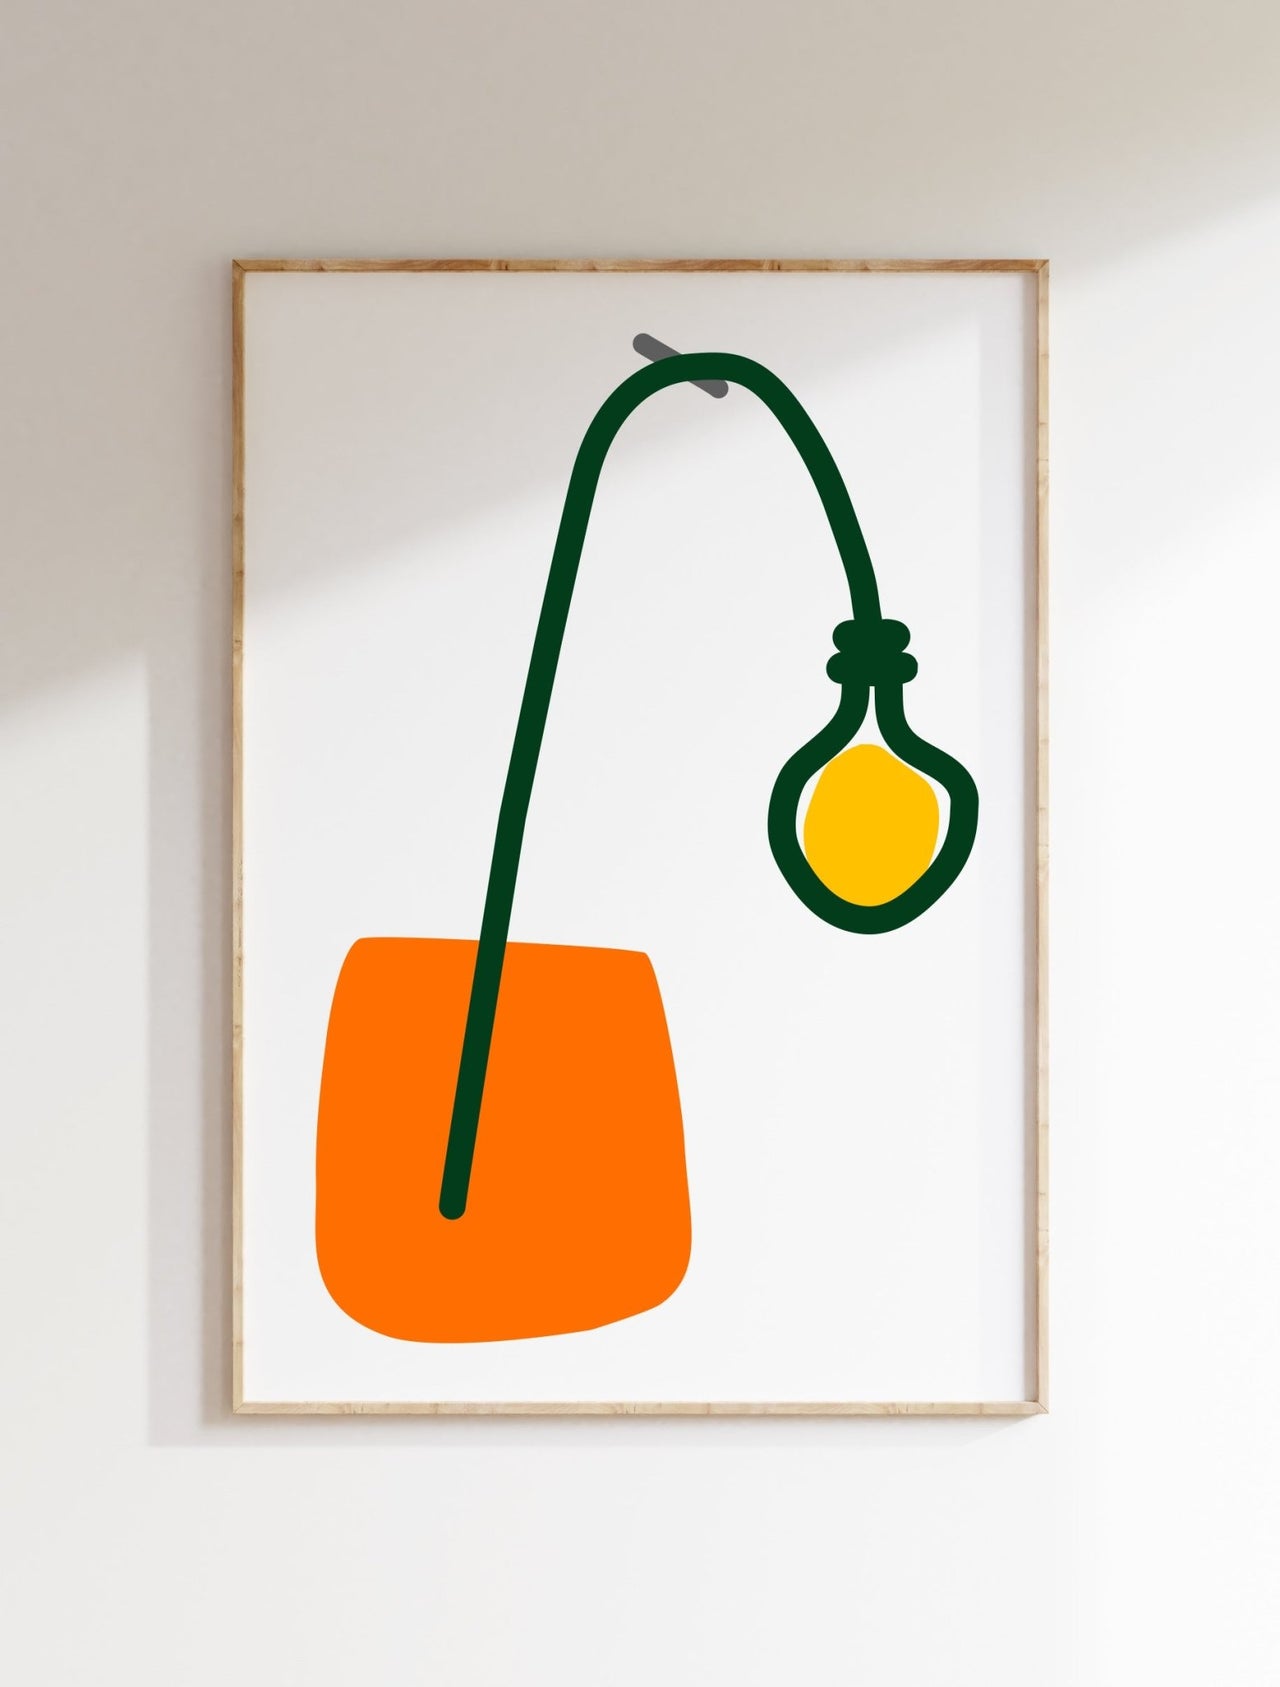 ORANGE LAMP STAND WITH AN ARCHED HANGING LIGHT GRAPHIC ART PRINT WITH A WHITE BACKGROUND